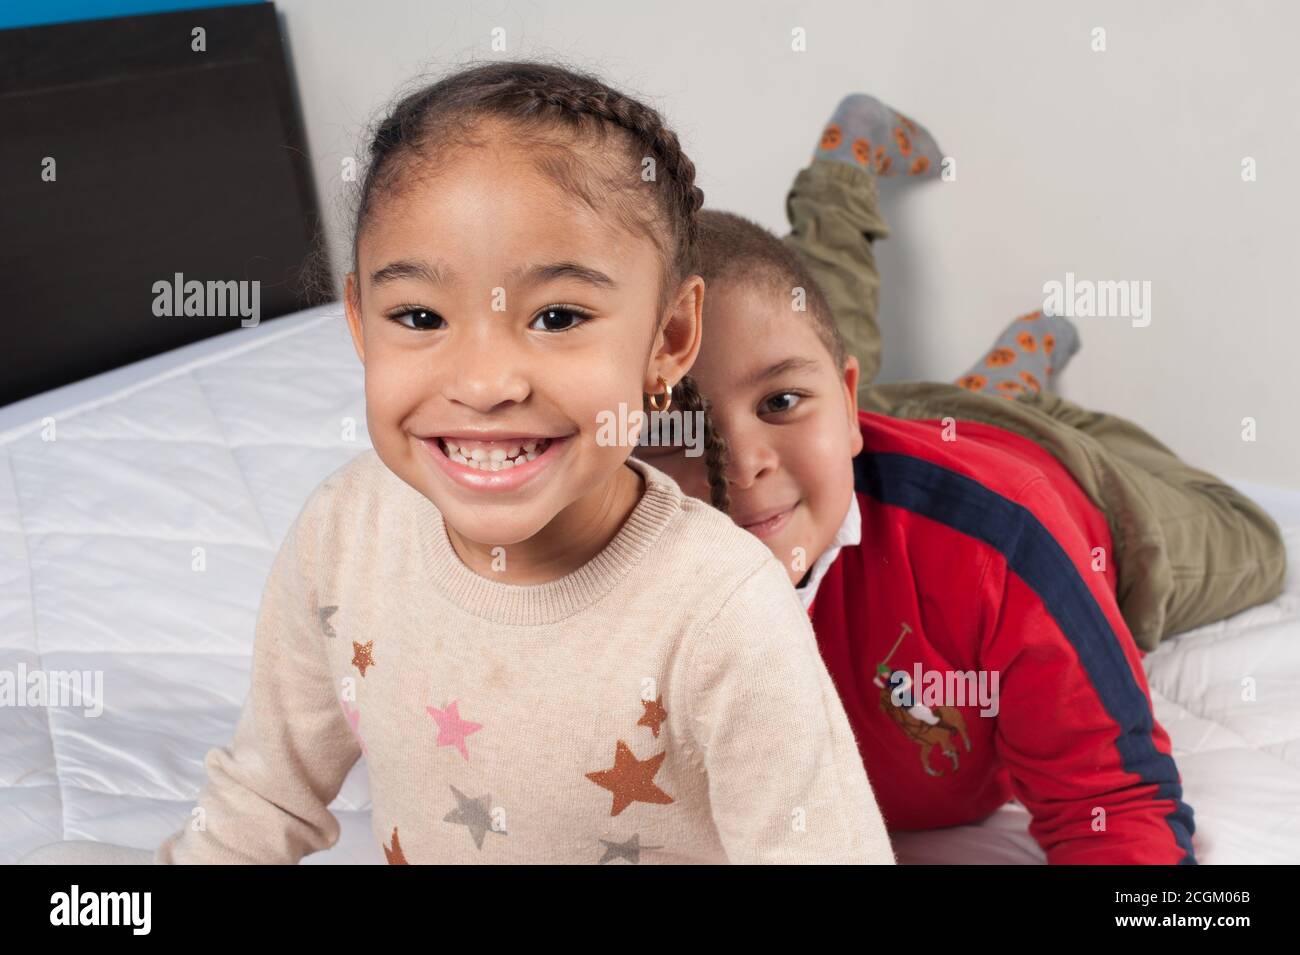 4 year old girl with 6 year old boy, both posing for the camera, smiling, friends Stock Photo